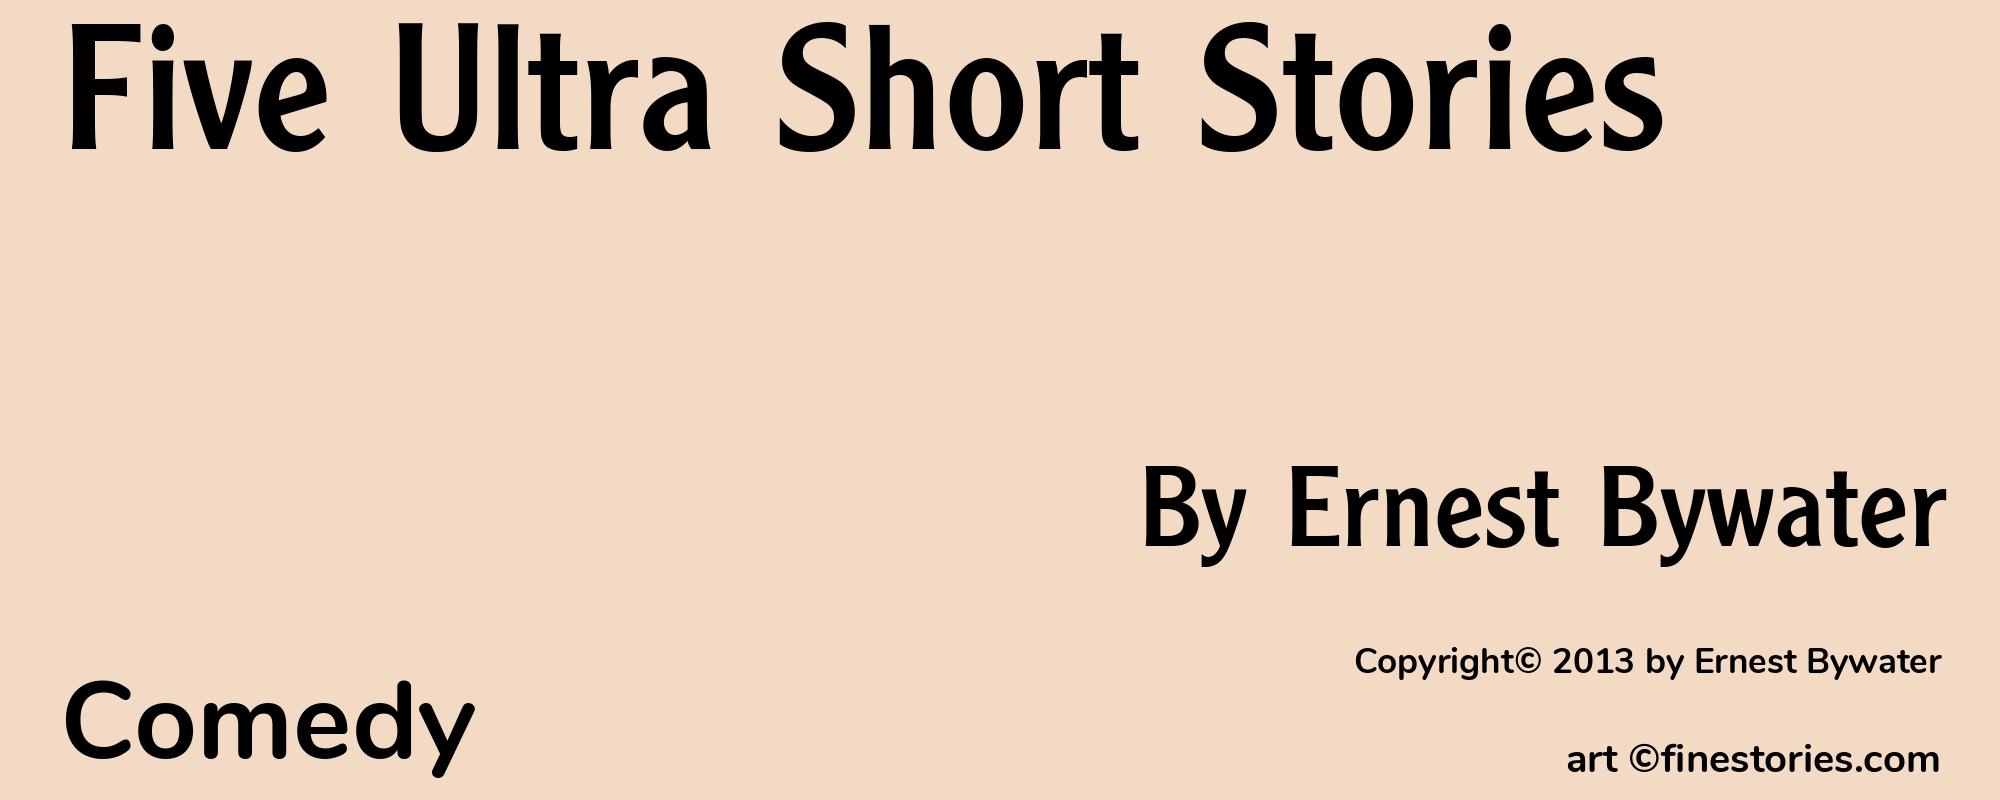 Five Ultra Short Stories - Cover